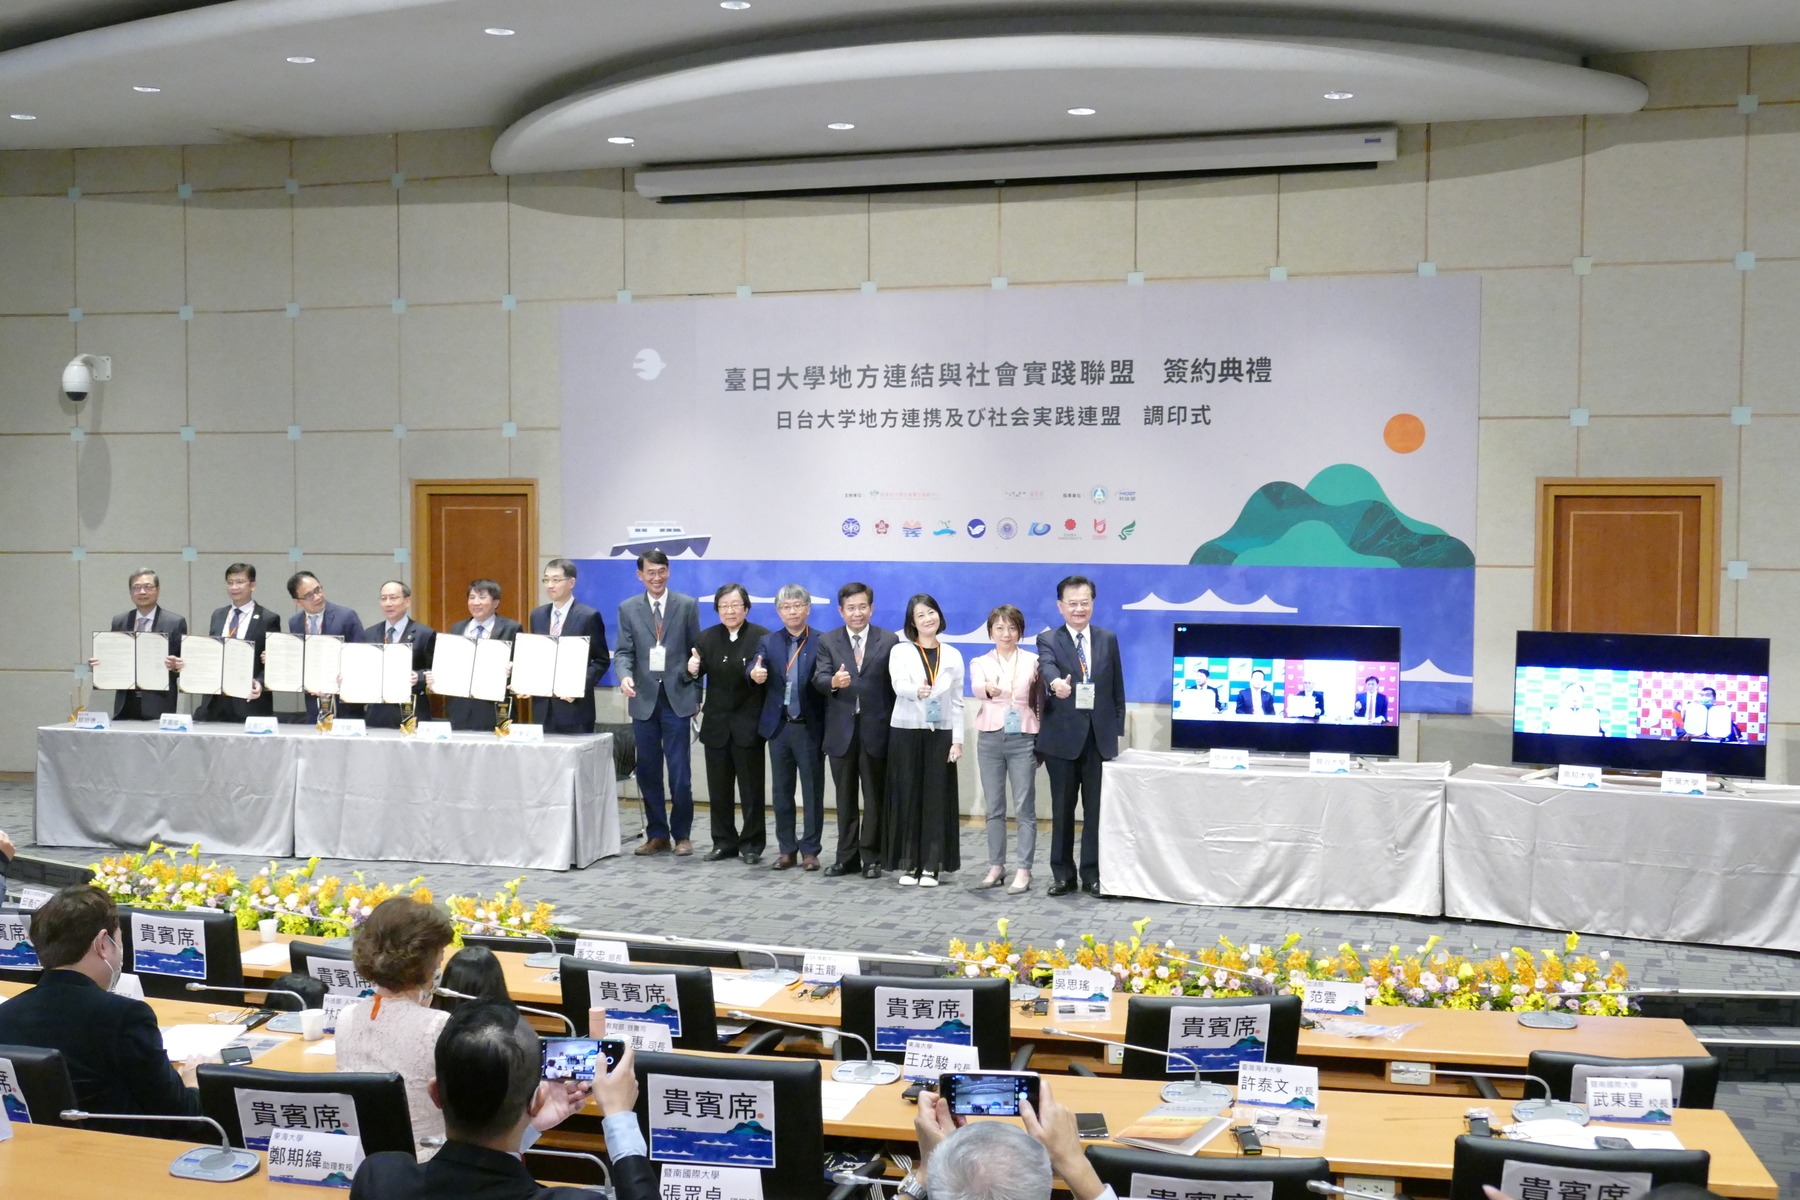 Ten universities from Taiwan and Japan joined the Taiwan-Japan Alliance of Local Revitalization and Social Practice. (Photo by Taiwan-Japan Alliance of Local Revitalization and Social Practice)